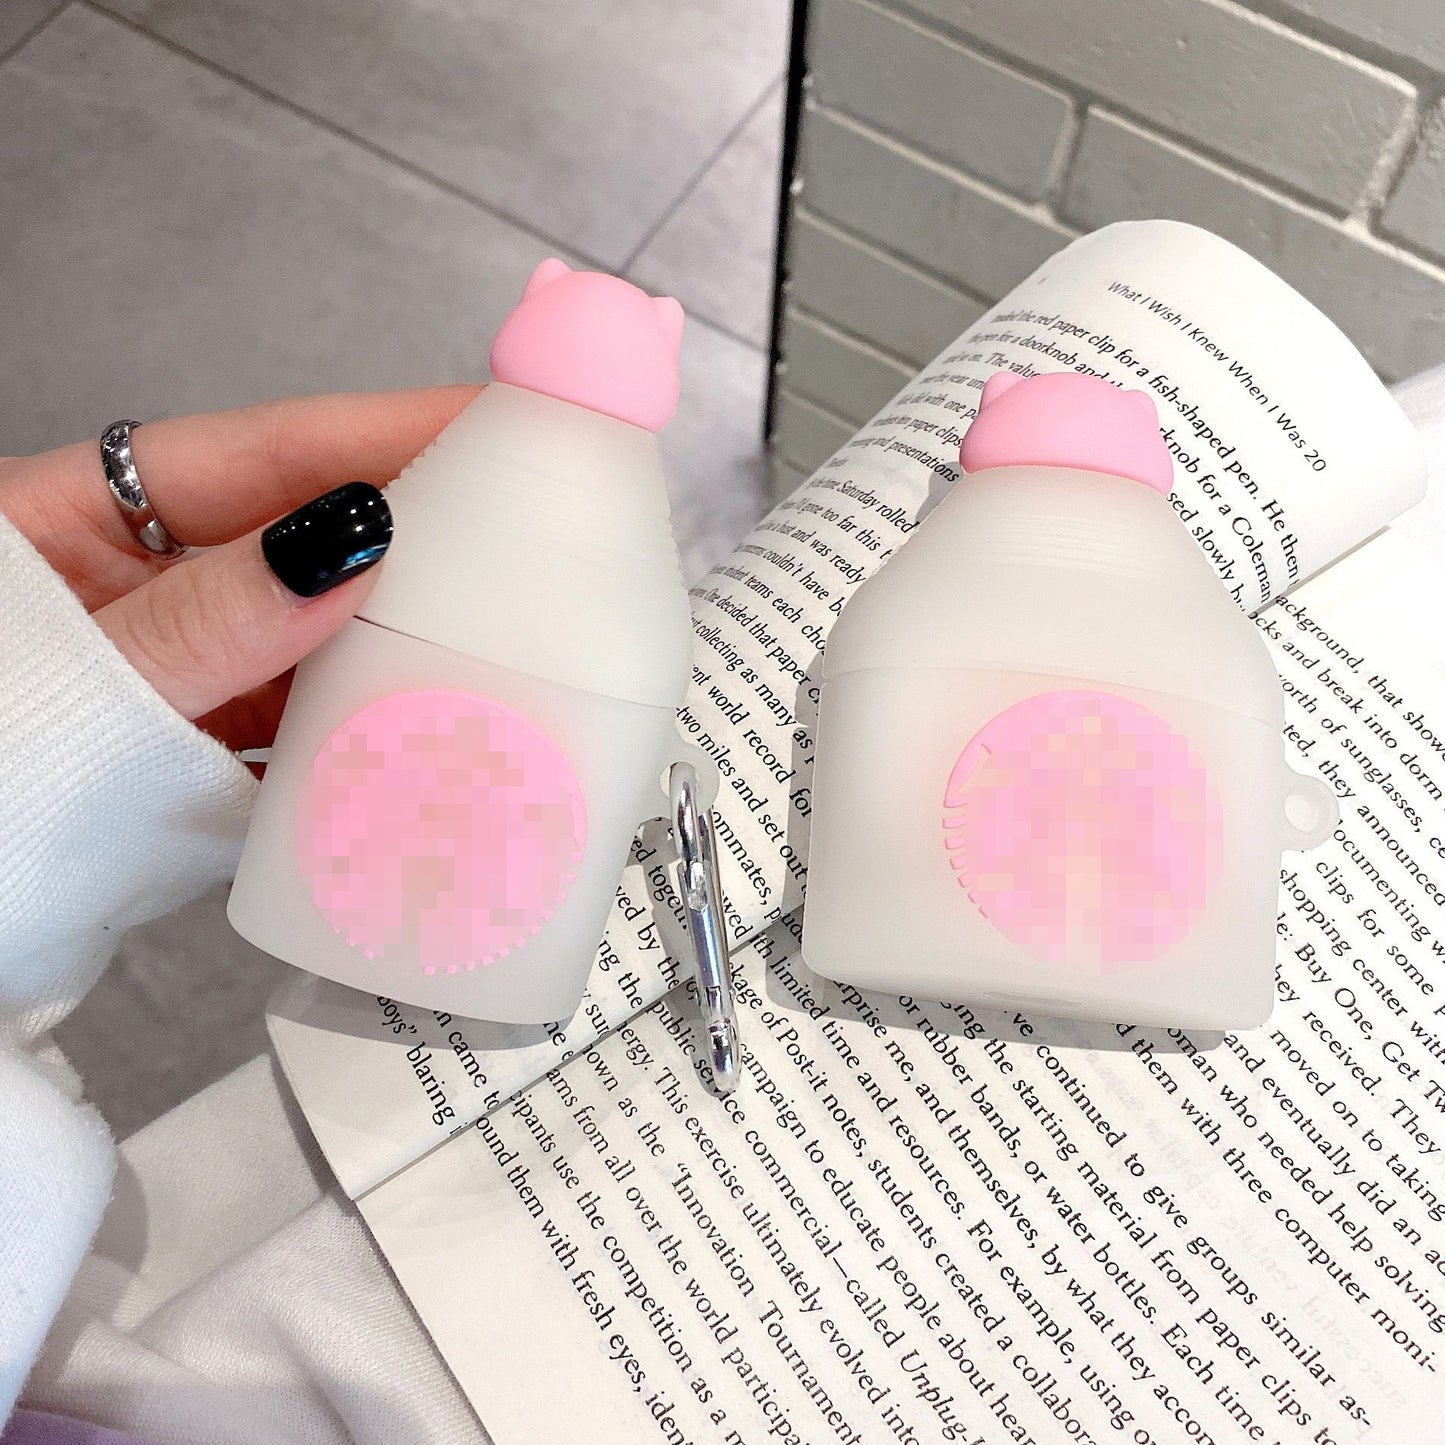 Discolor Water Bottle Design Airpods Case